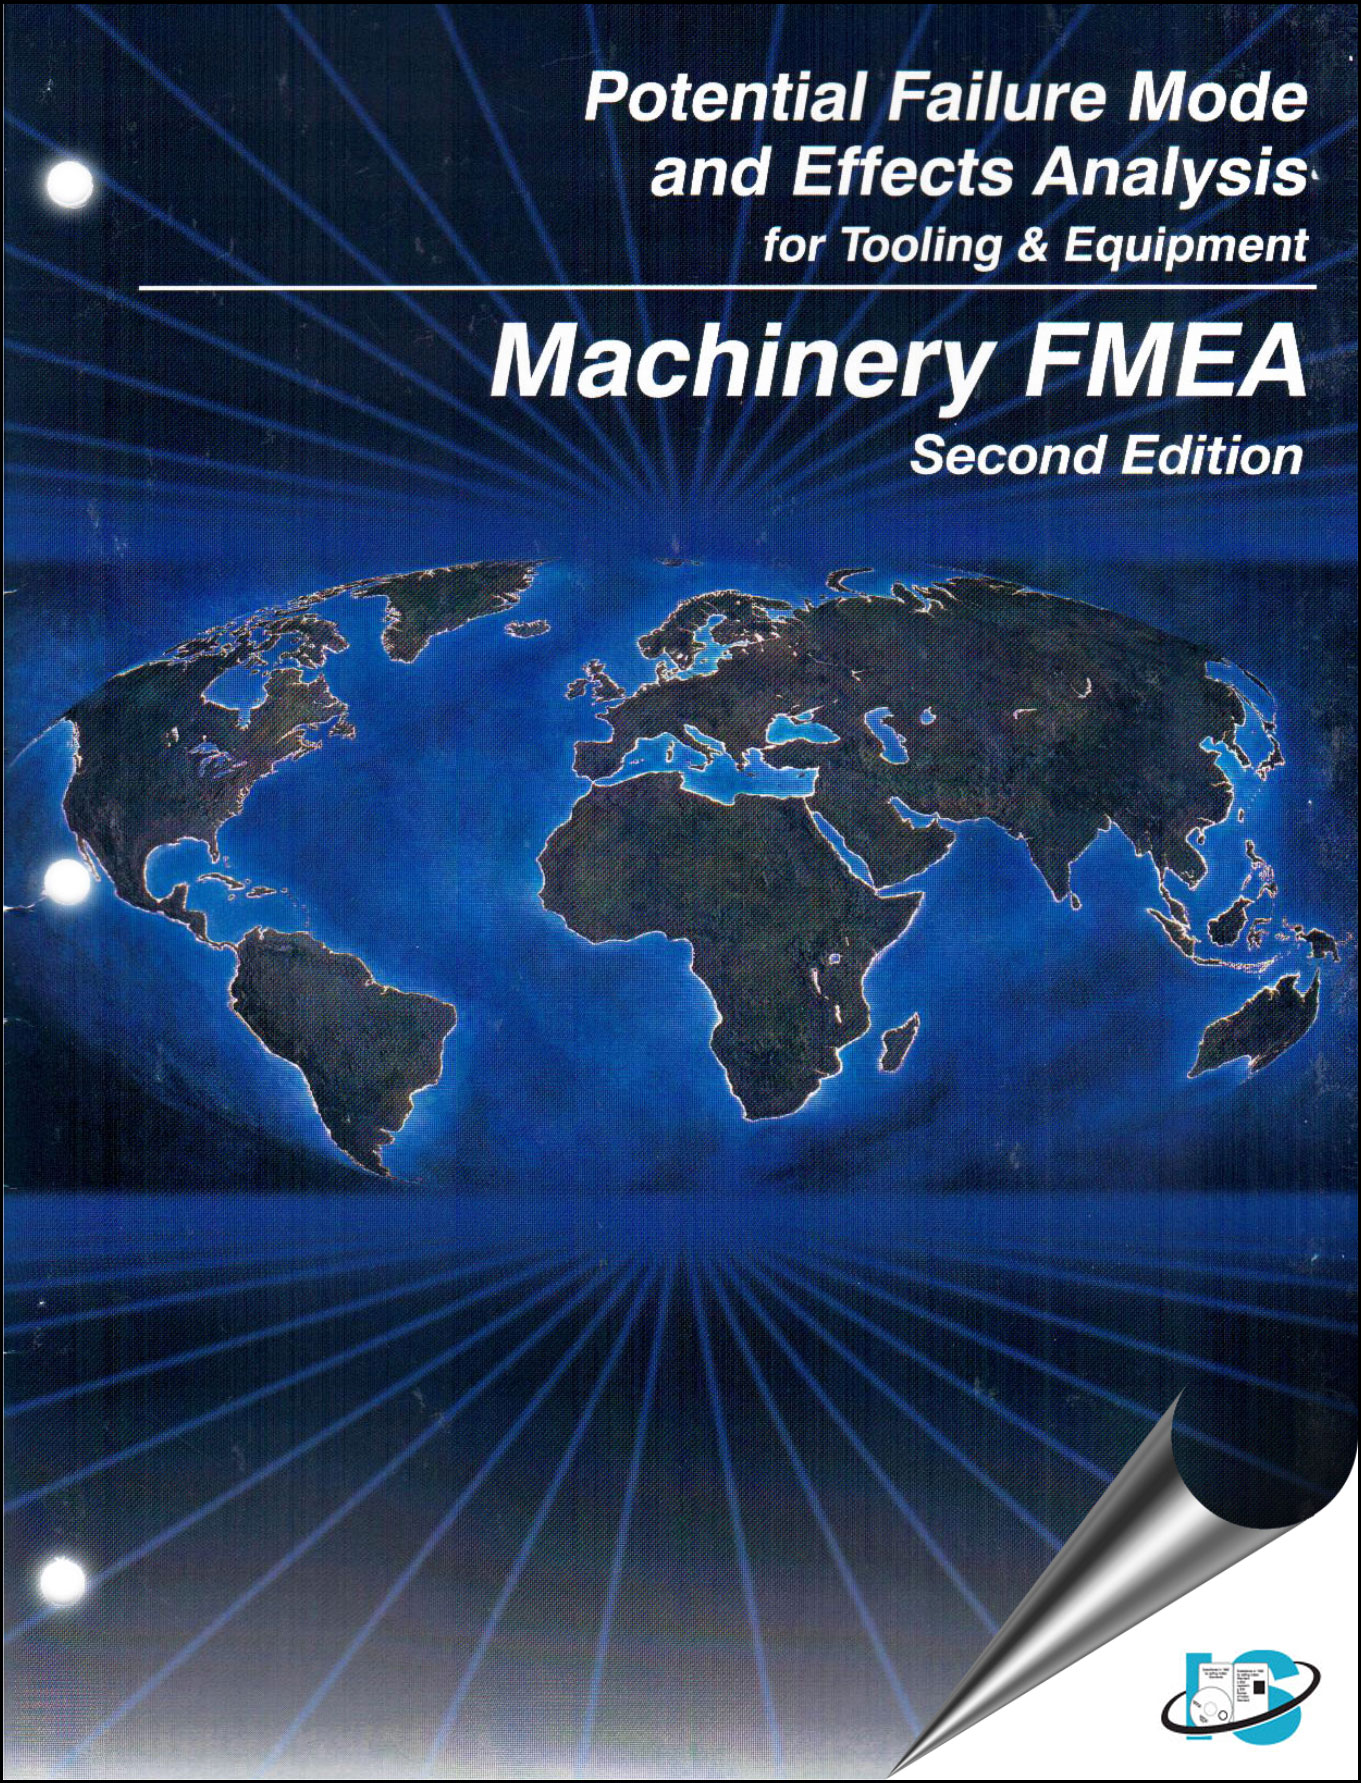 Ford fmea handbook requirements #4